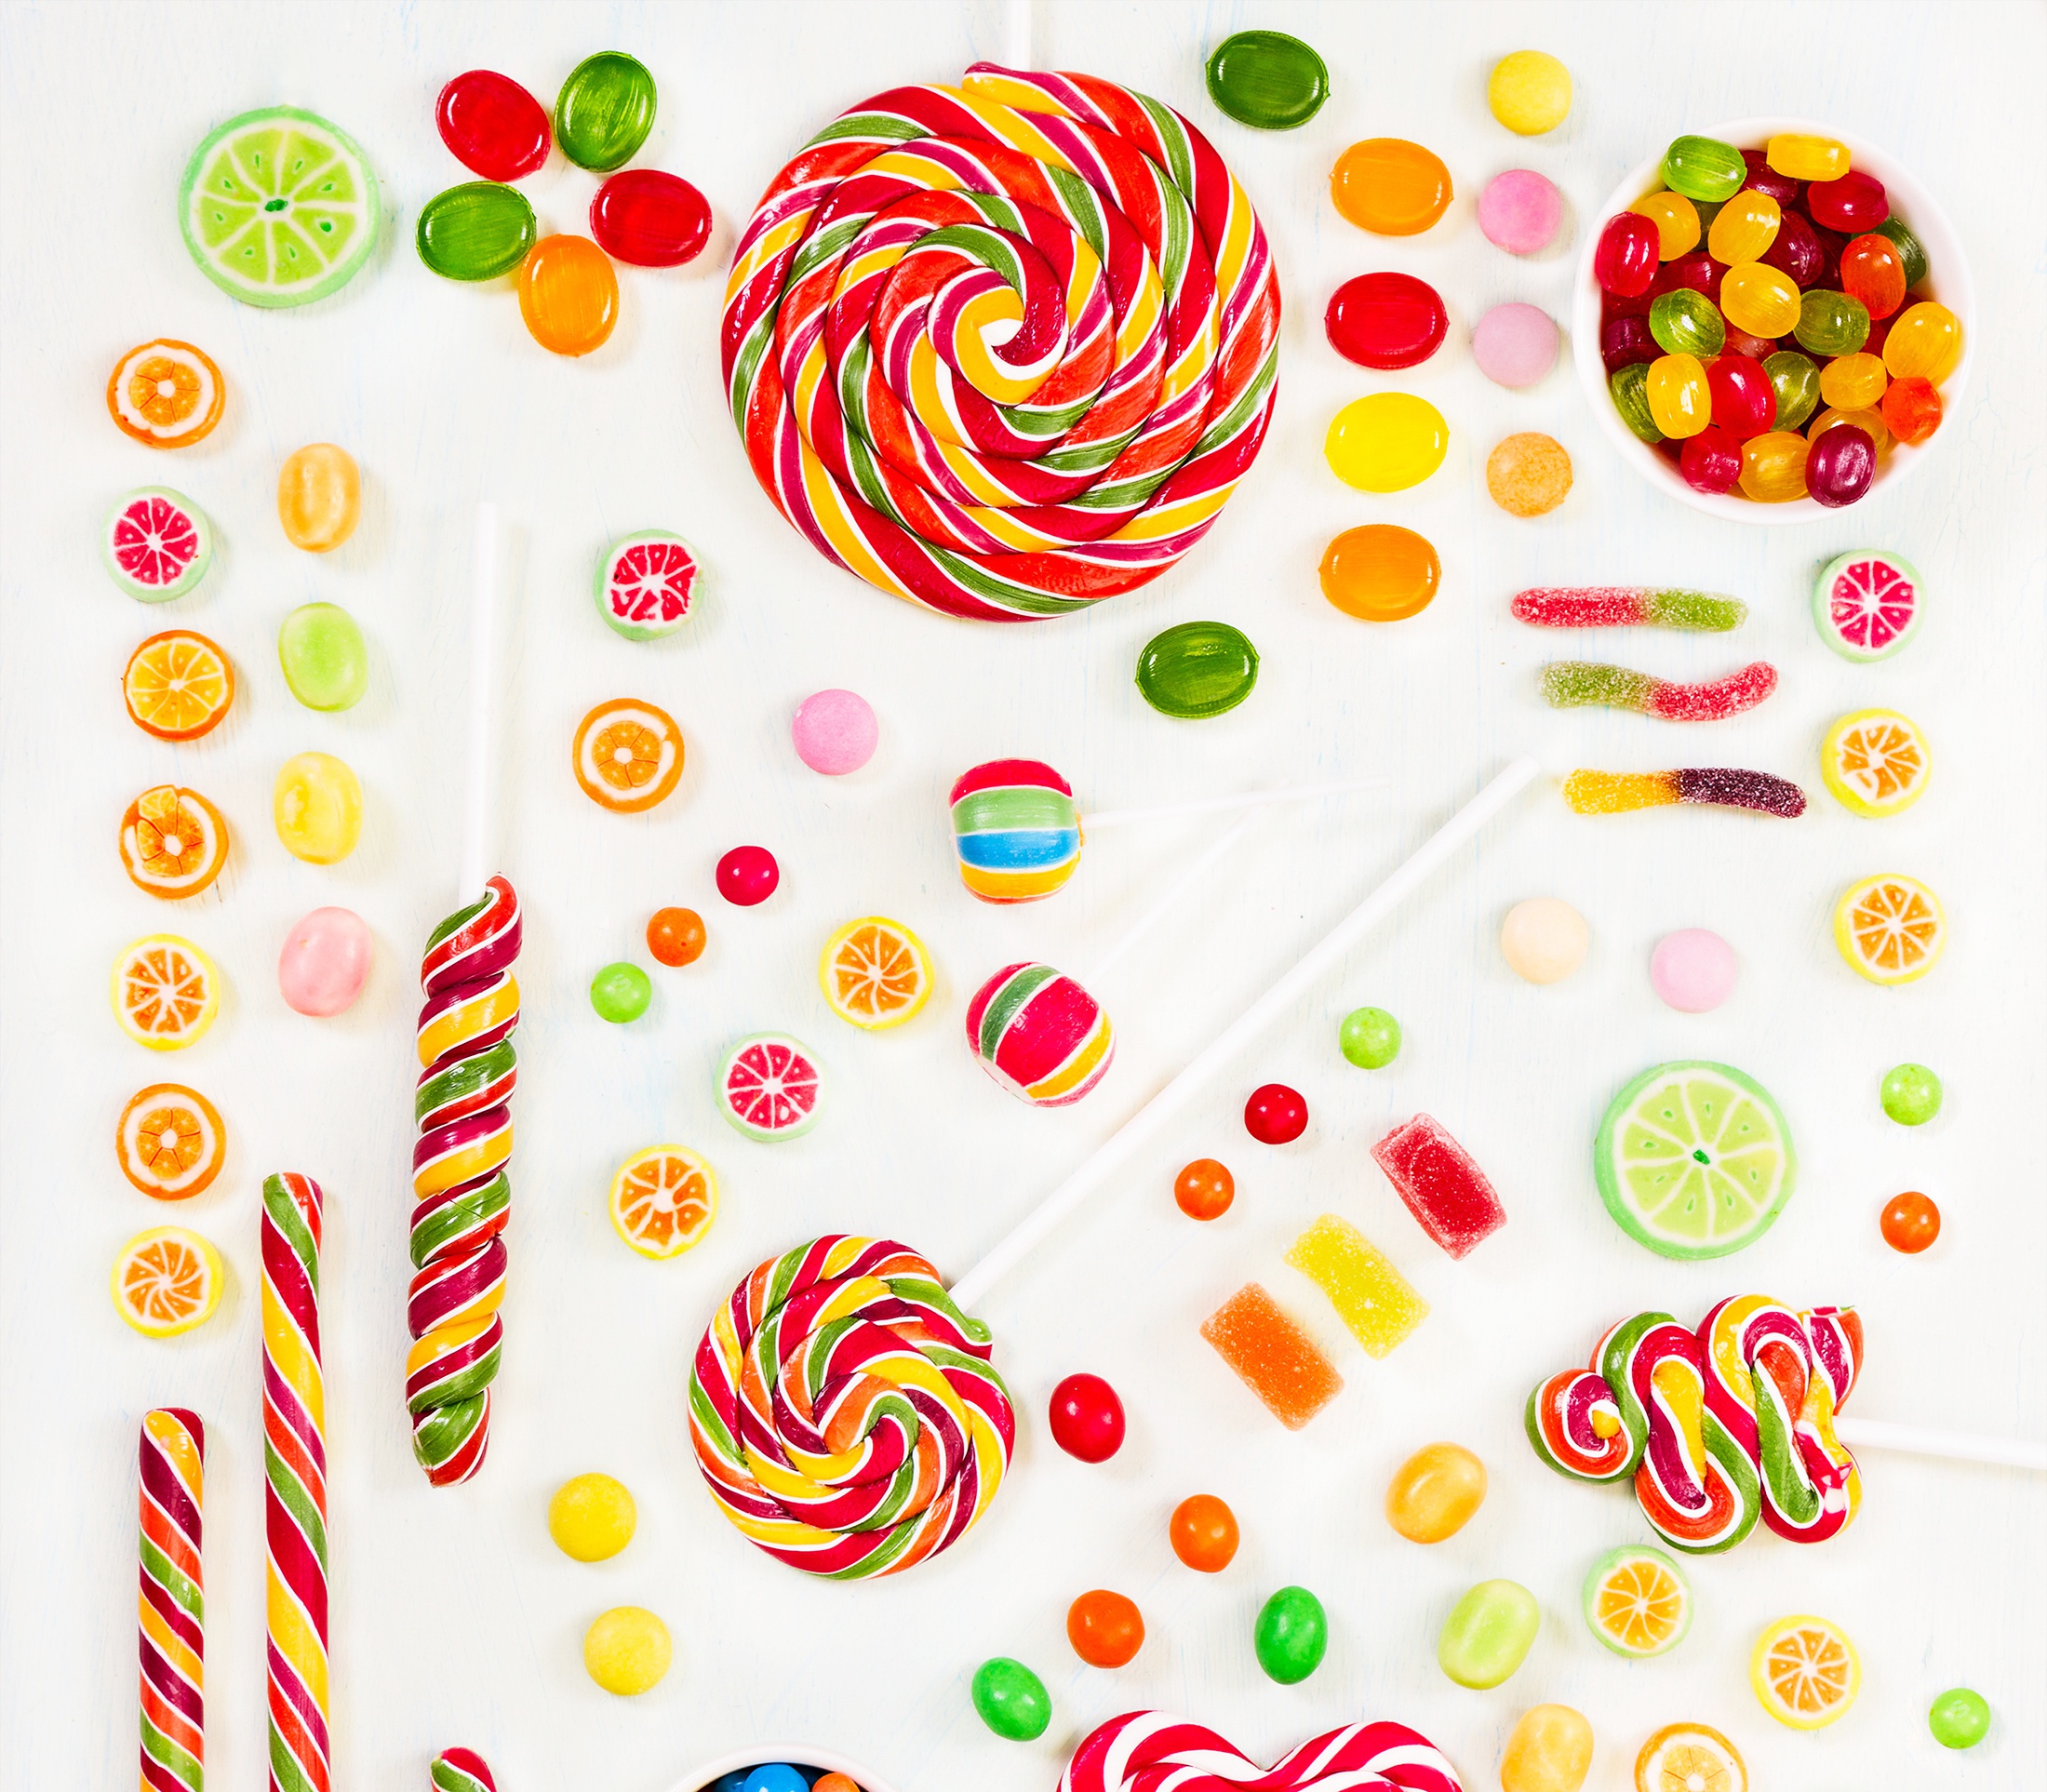 Candy Colorful Lollipop Sweets 2200x1926